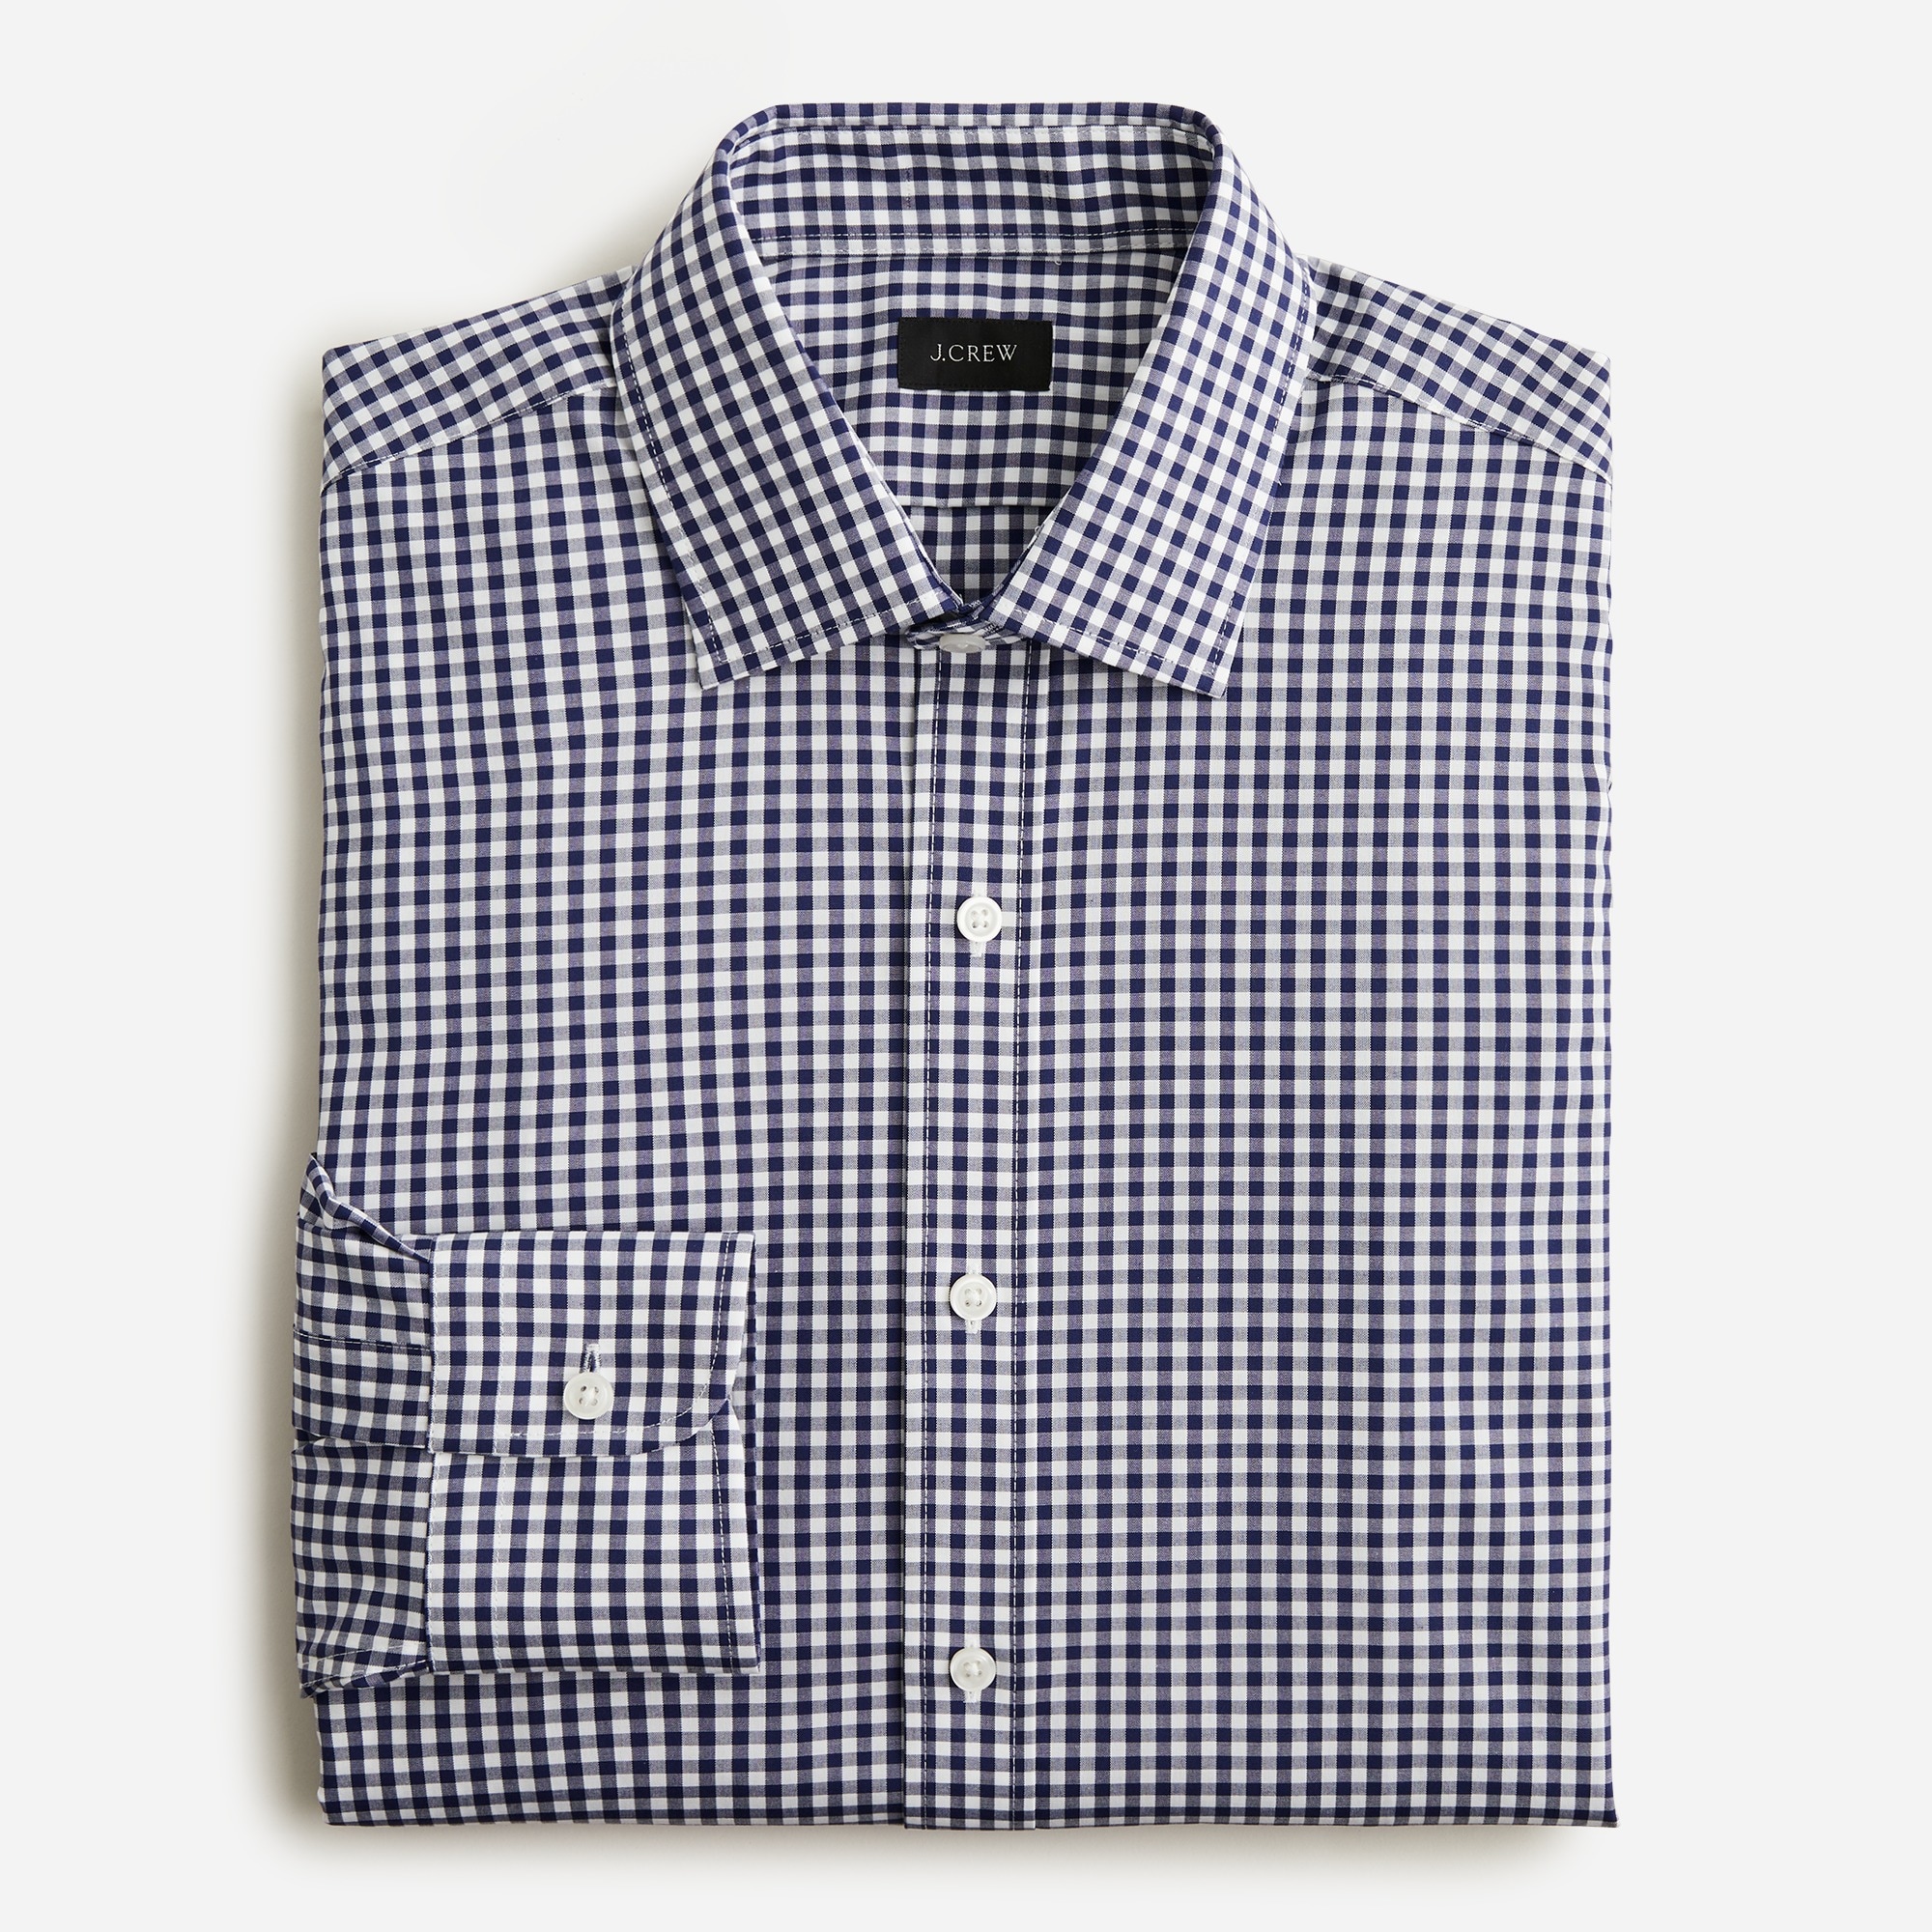  Slim-fit Bowery wrinkle-free stretch cotton shirt in gingham